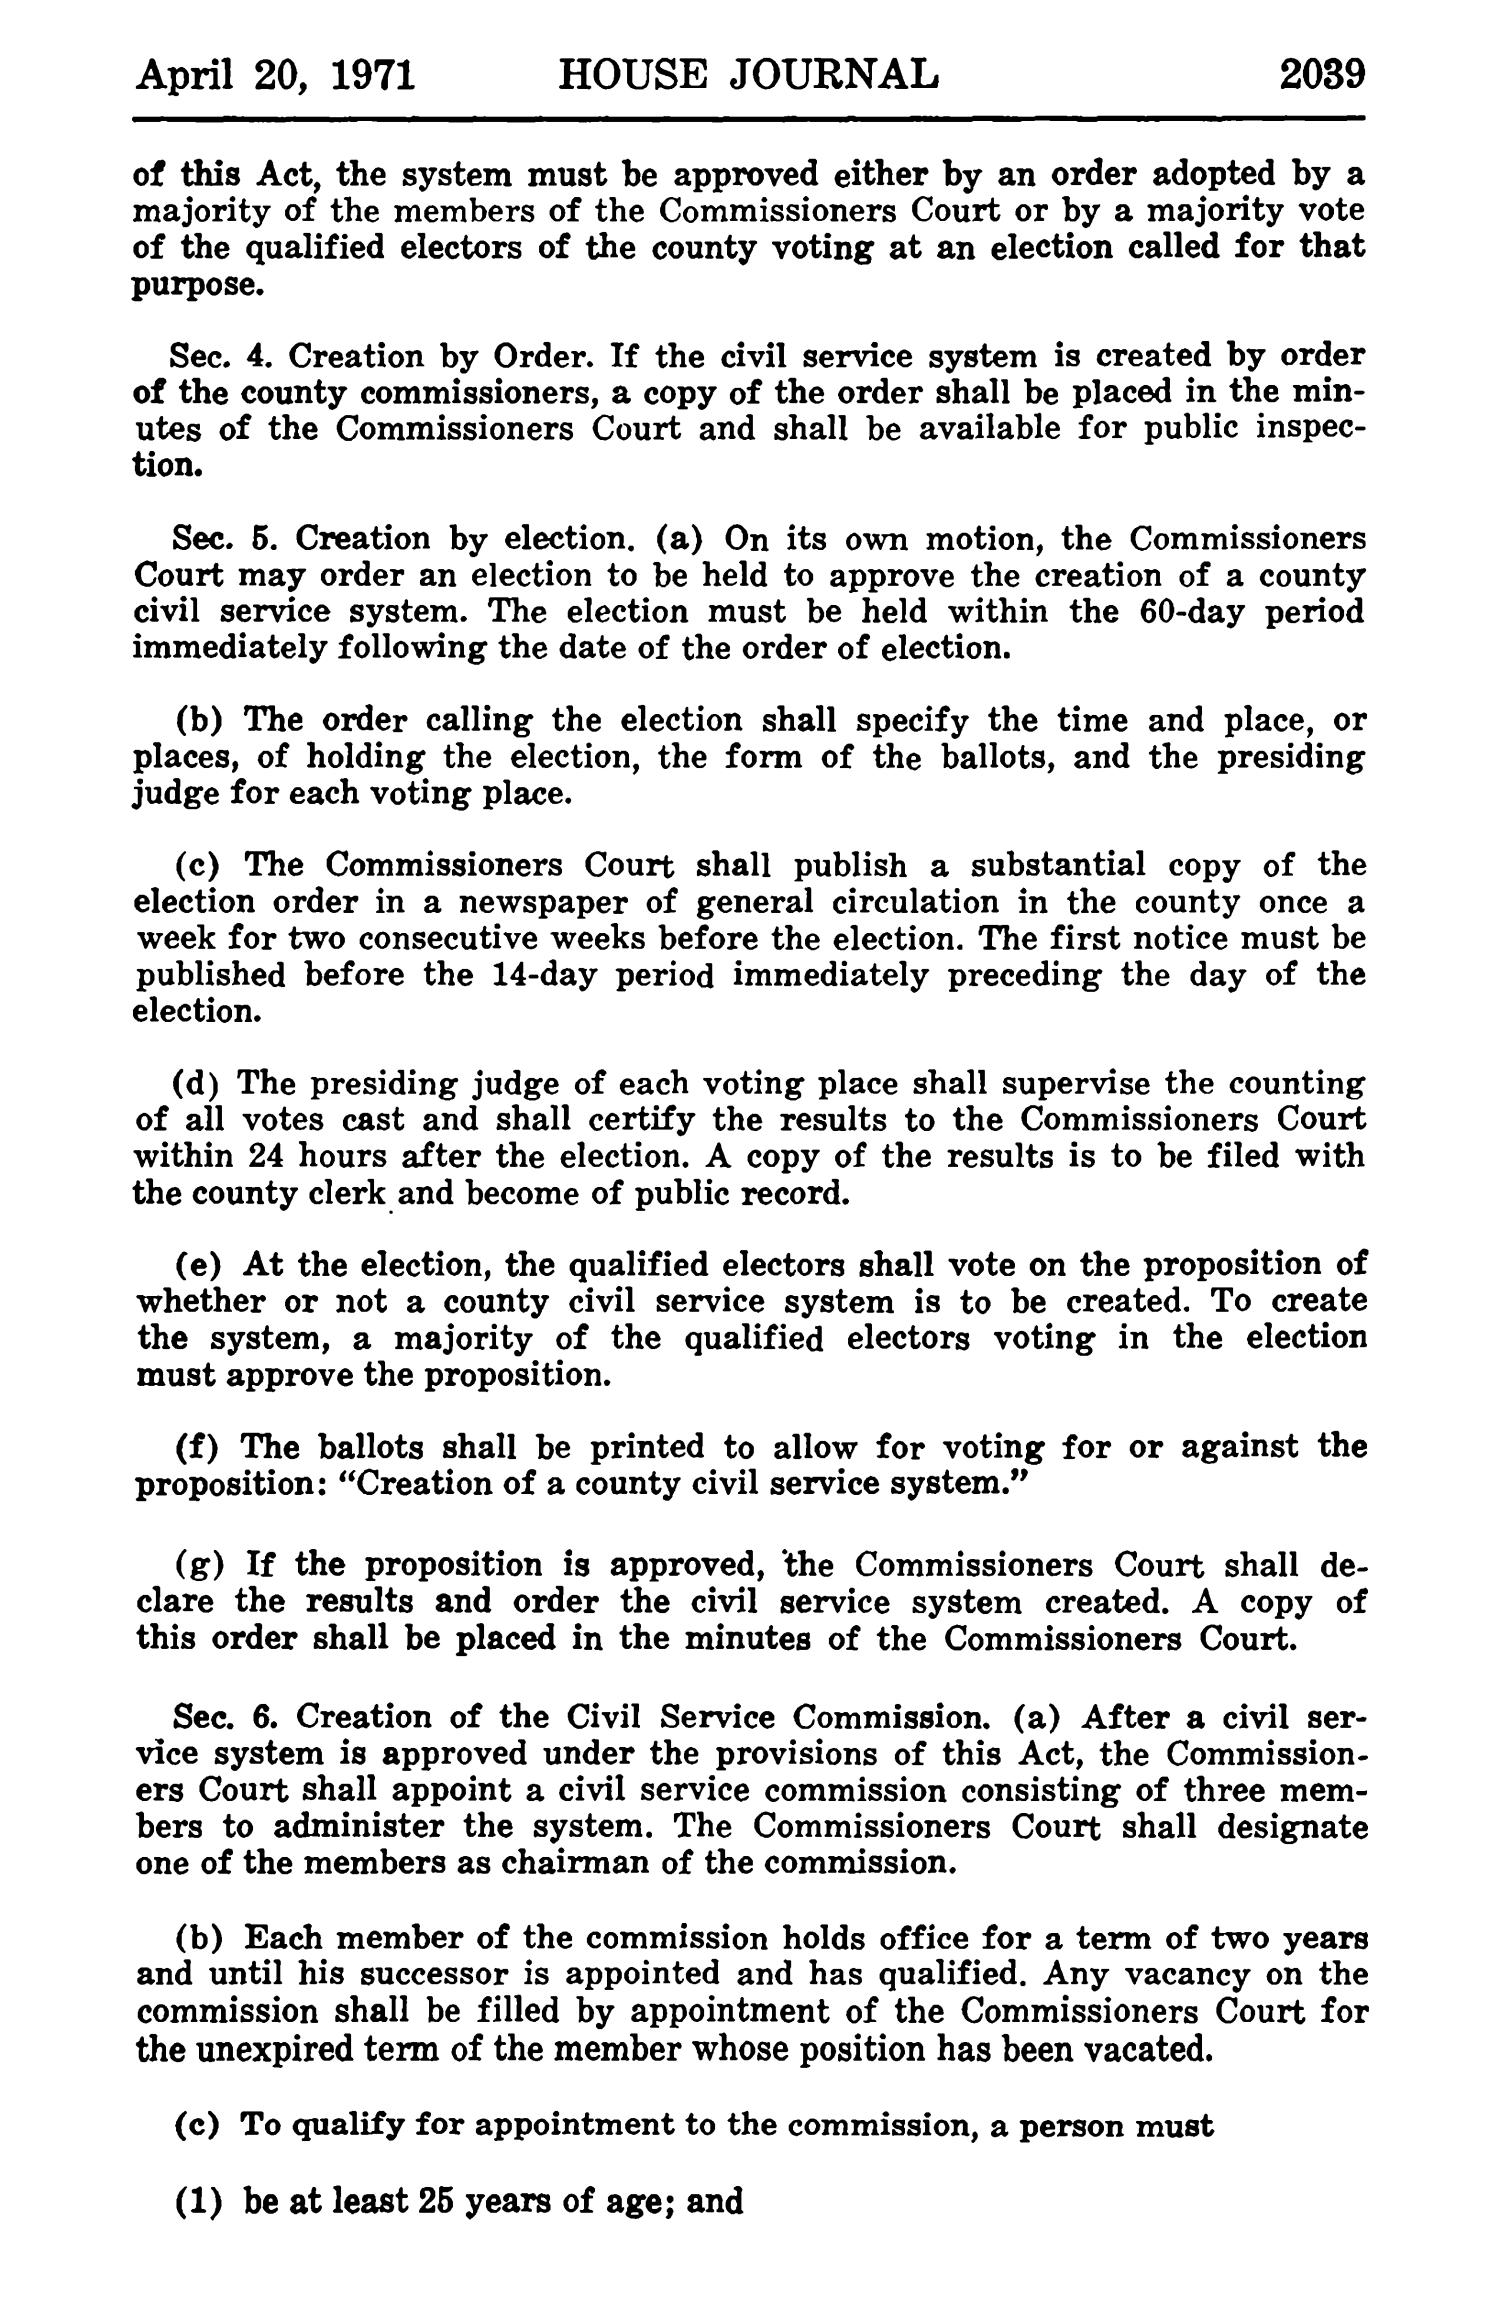 Journal of the House of Representatives of the Regular Session of the Sixty-Second Legislature of the State of Texas, Volume 2
                                                
                                                    2039
                                                